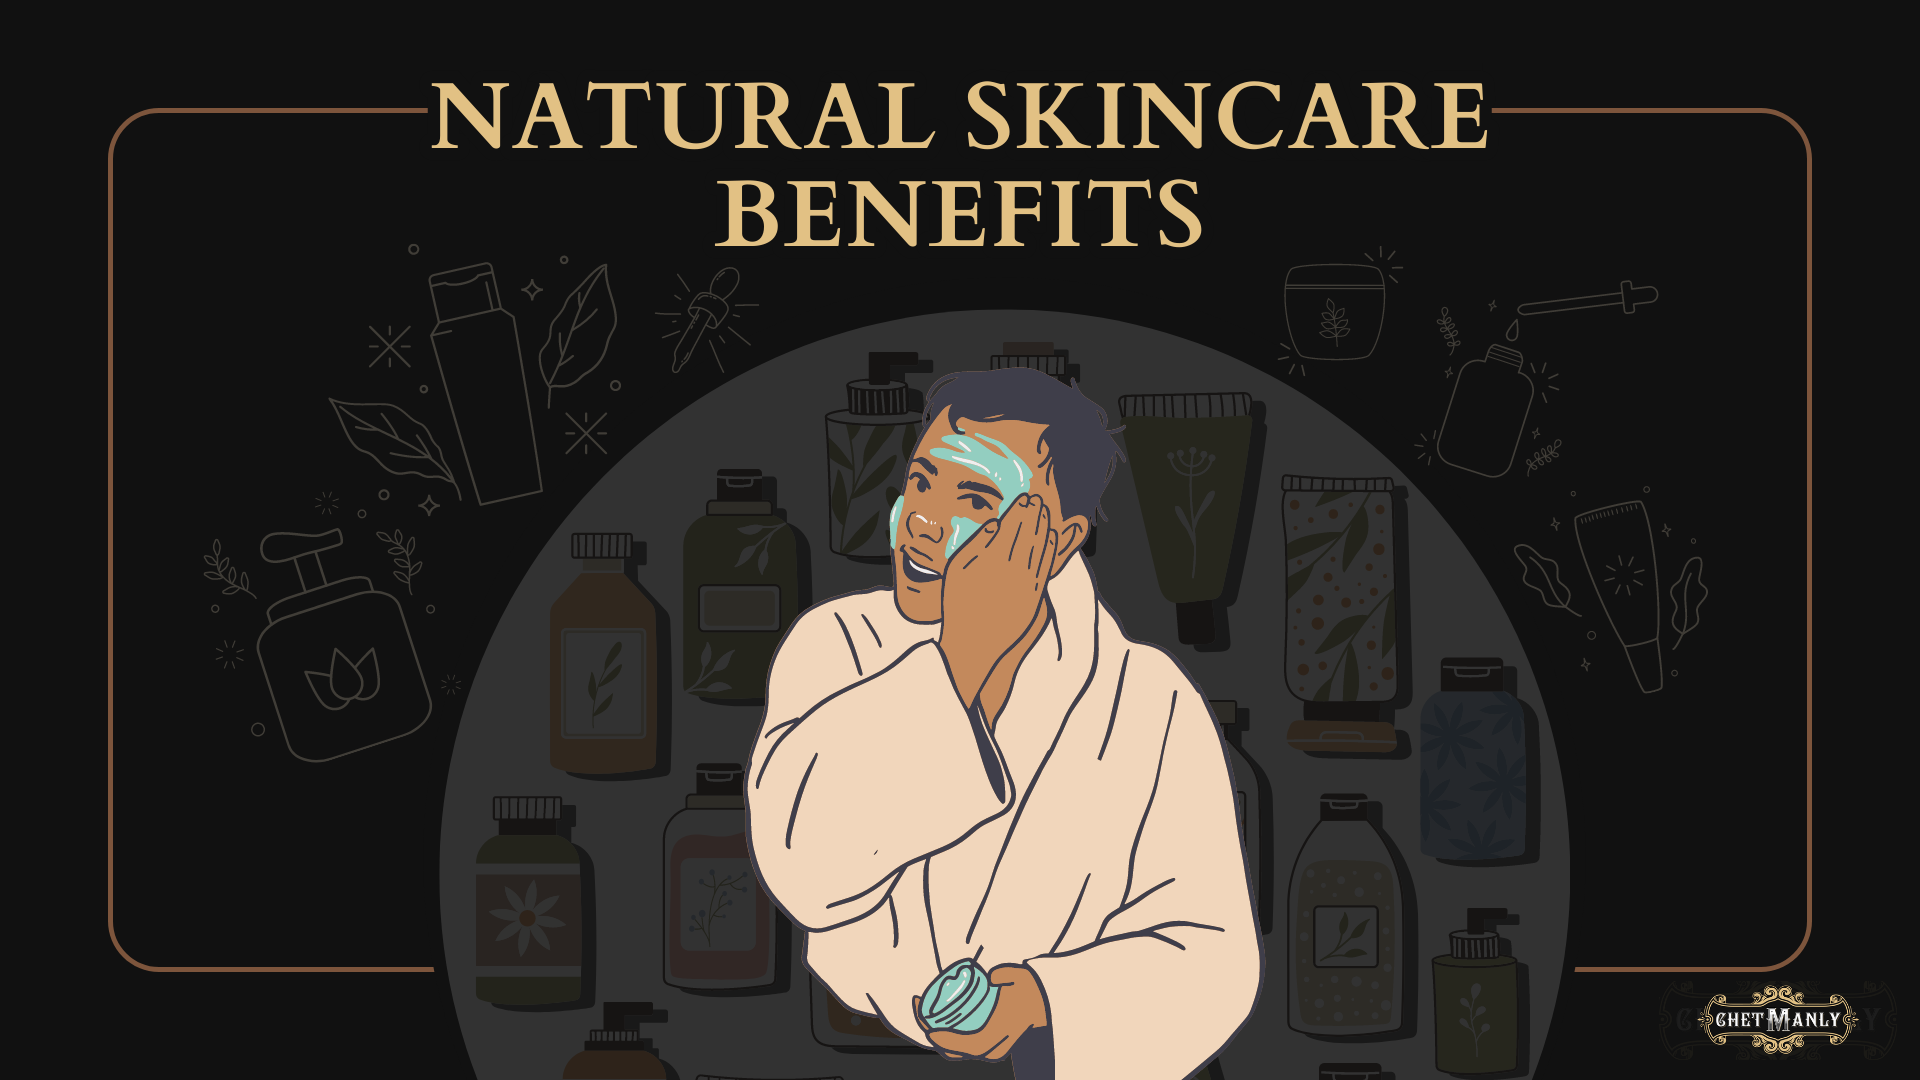 The Benefits of Using Natural Skincare Products for Men